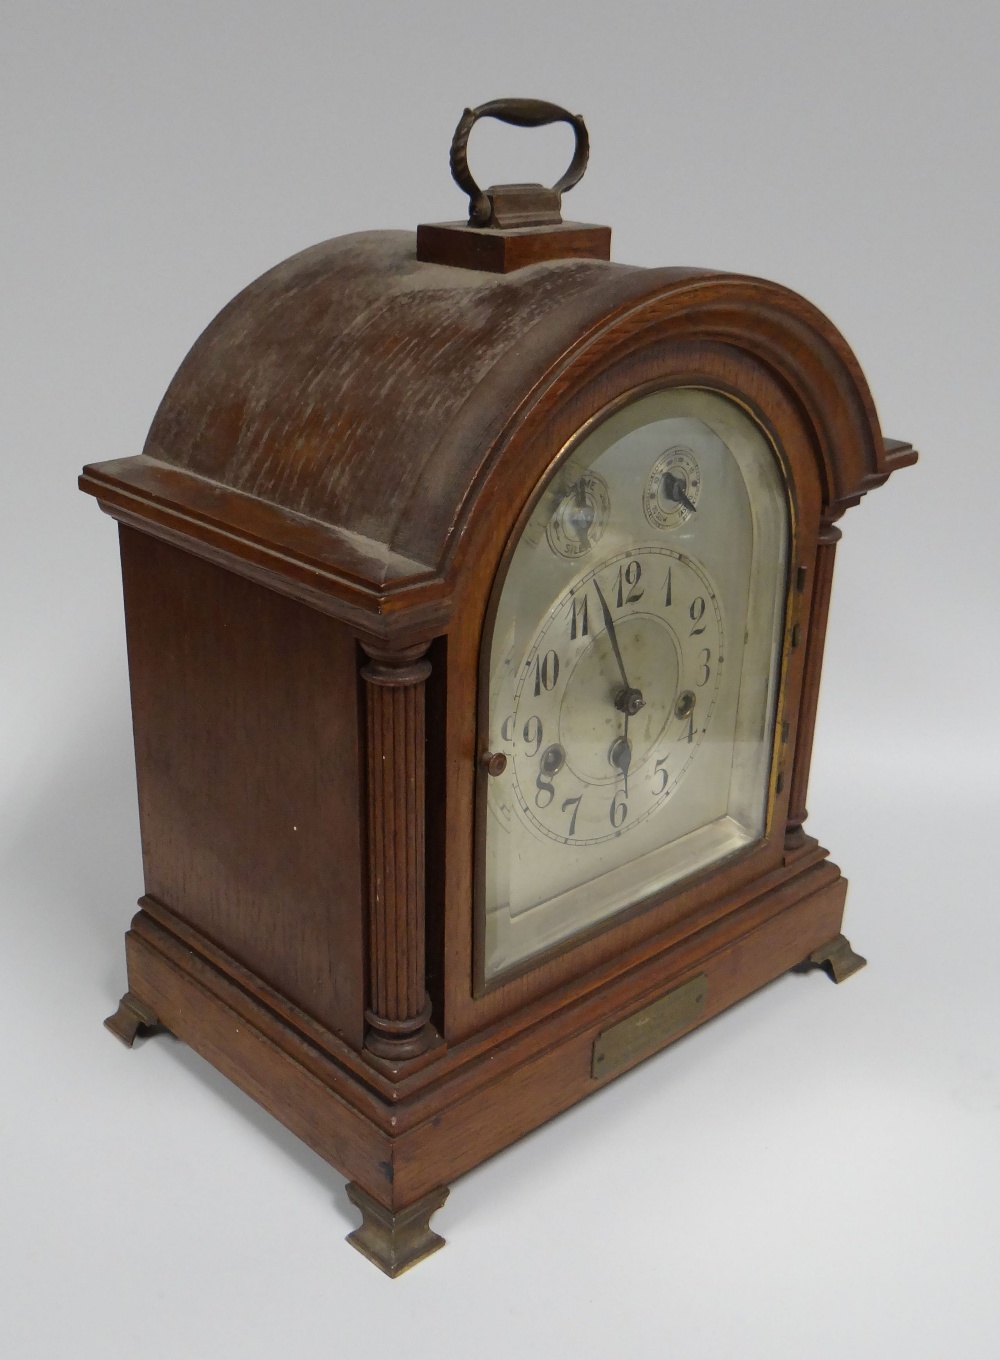 AN OAK ENCASED BRACKET-CLOCK having an arched silver dial with Arabic numberals and two subsidiary